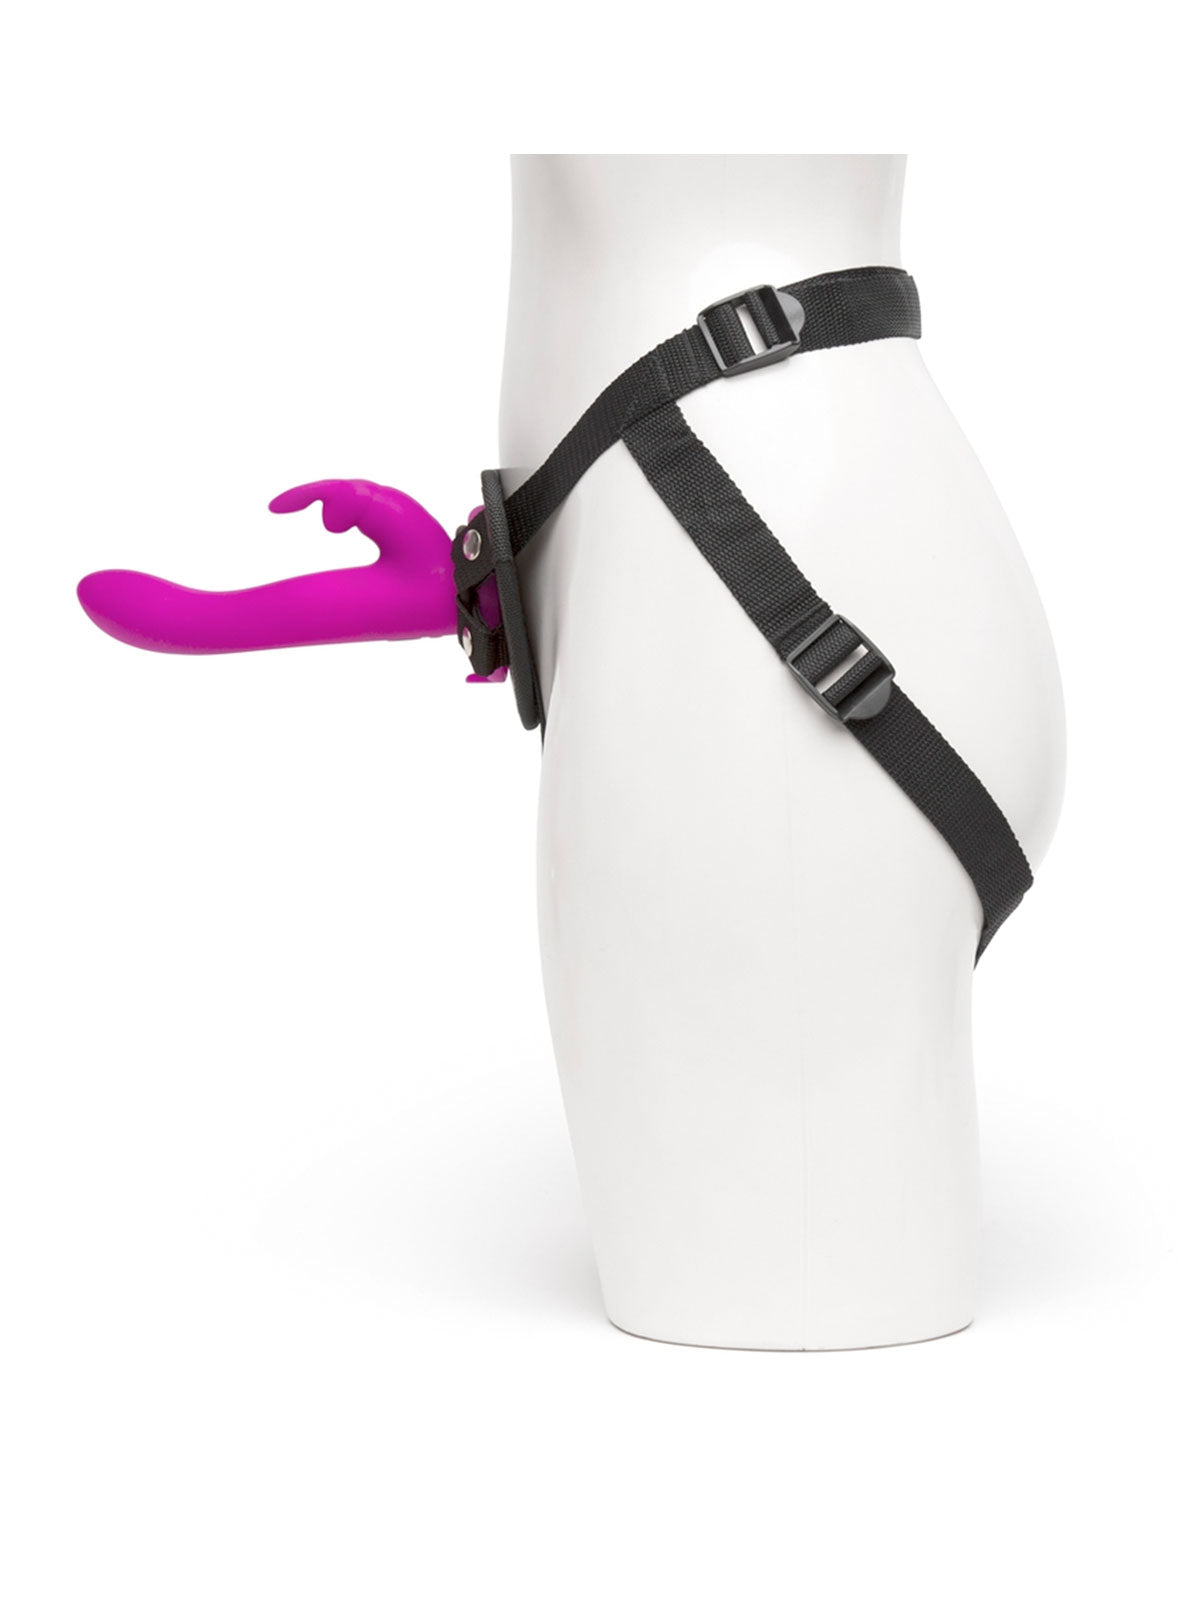 Strap on Dildo Harness by Happy Rabbit Side View